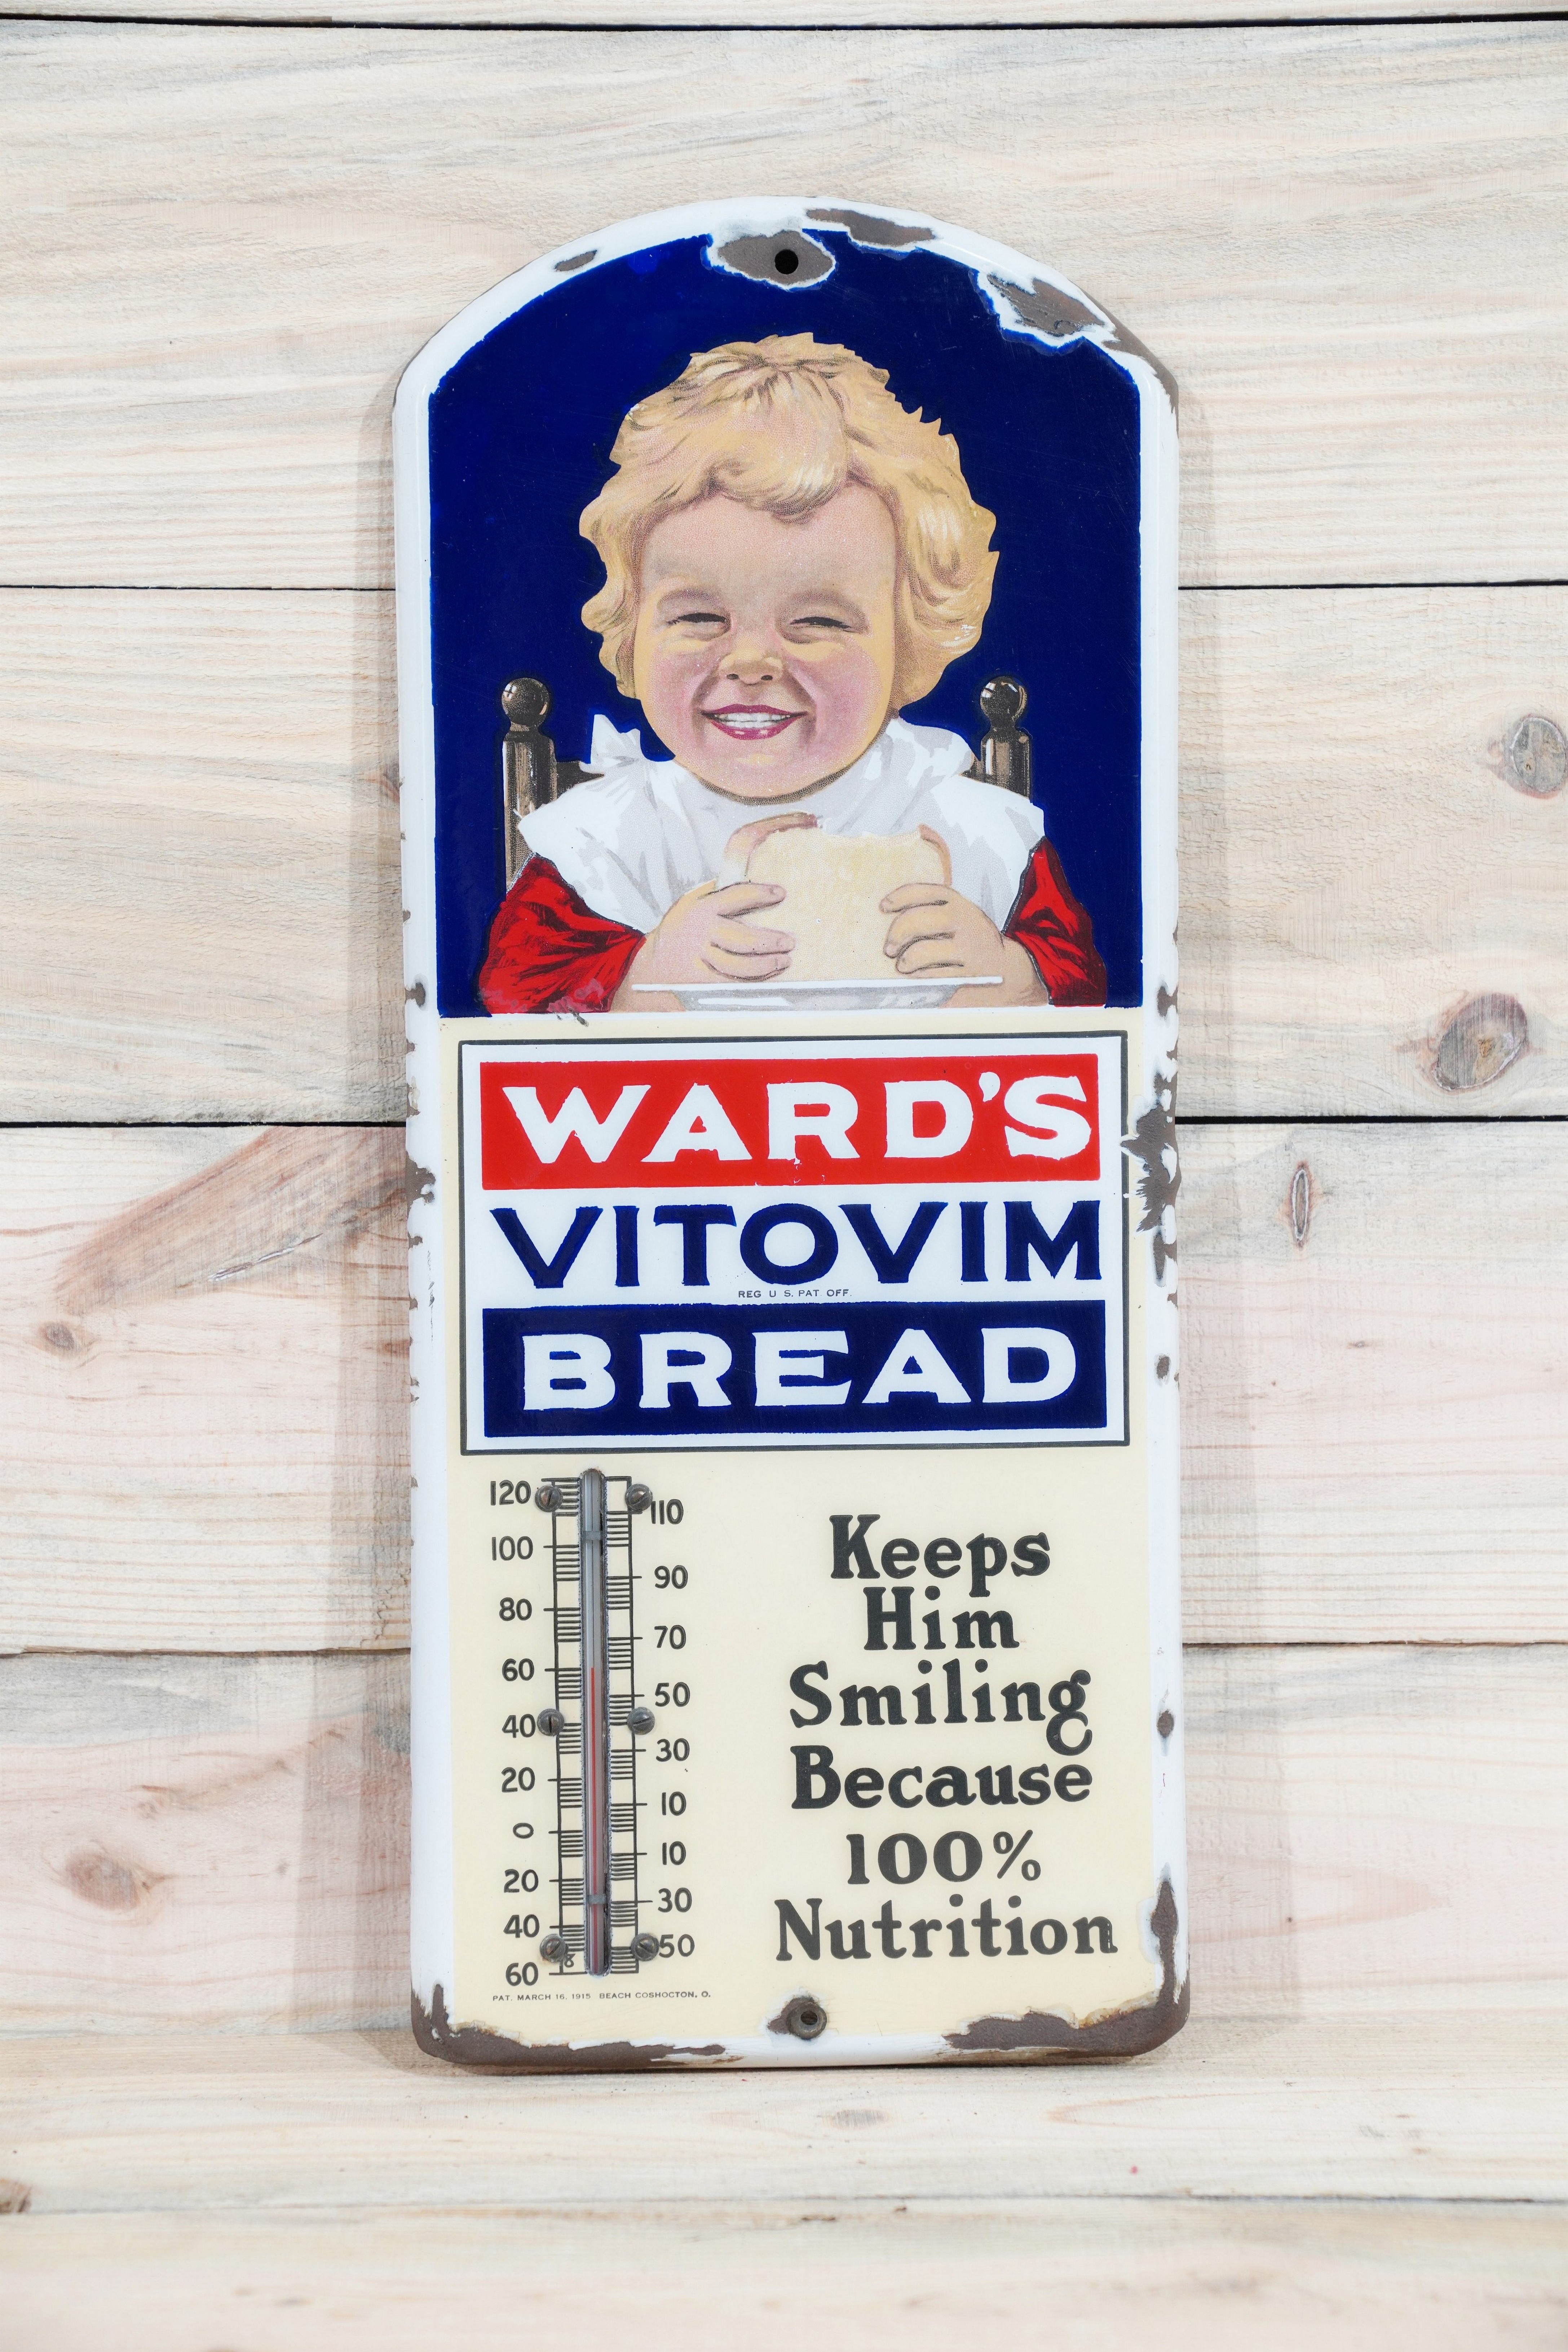 1940's-1950's BRAUNS BREAD THERMOMETER - Vintage Concepts Signs, LLC